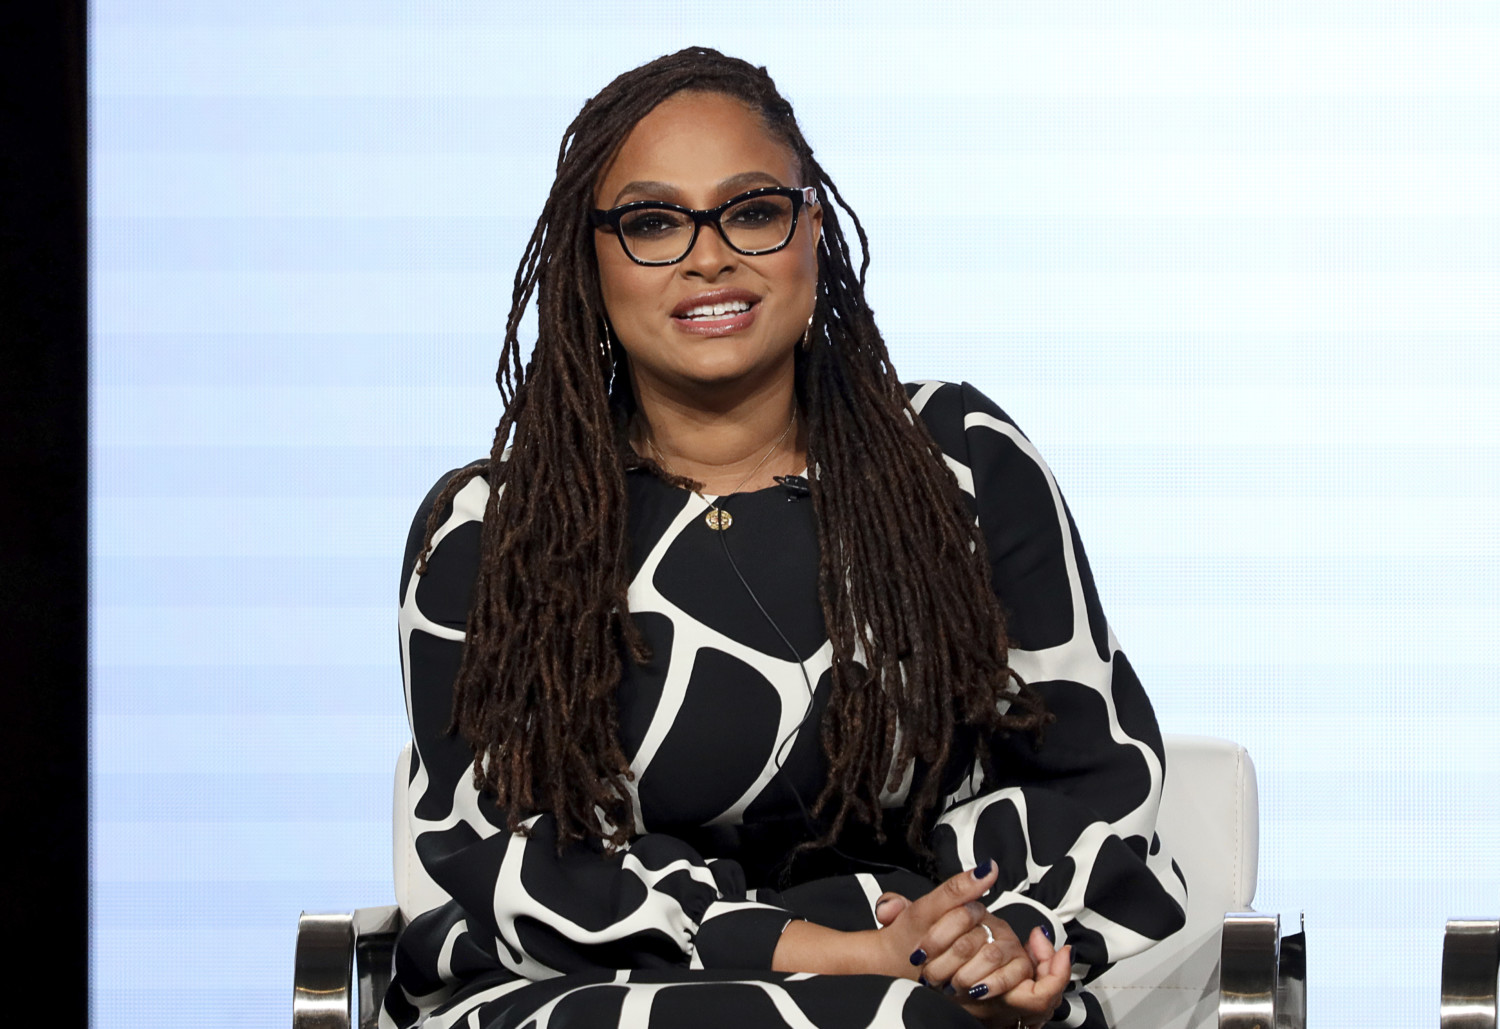 FILE - In this Thursday, Jan. 16, 2020, file photo, Ava DuVernay speaks at the OWN: Oprah Winfrey Network's "Cherish the Day" series panel during the Discovery Network TCA 2020 Winter Press Tour in Pasadena, Calif. John Legend, Gabrielle Union and Ava DuVernay are some of the many black cultural leaders who have signed a letter to fight against racism, promote equal pay and ask industries to disassociate from police. The letter was released Friday, June 19, 2020 by a new organization called the Black Artists for Freedom, which describes itself as a collective of black workers in the culture industries. (Photo by Willy Sanjuan/Invision/AP)